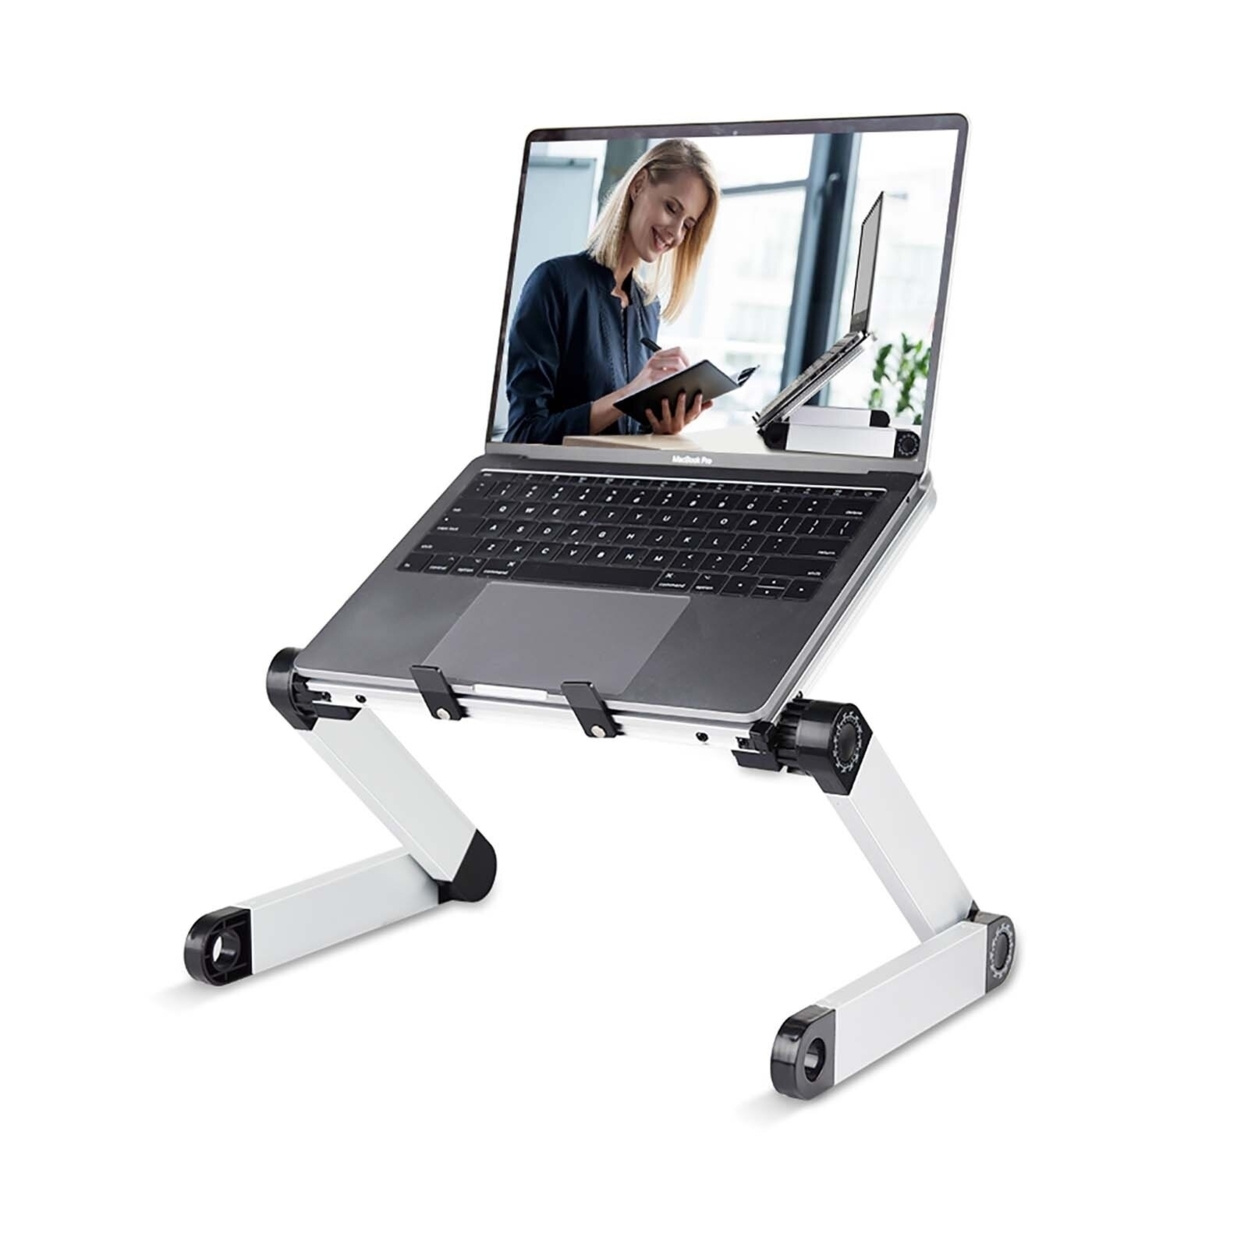 Rainbean Aluminum Adjustable and Foldable Portable Laptop Stand in Black